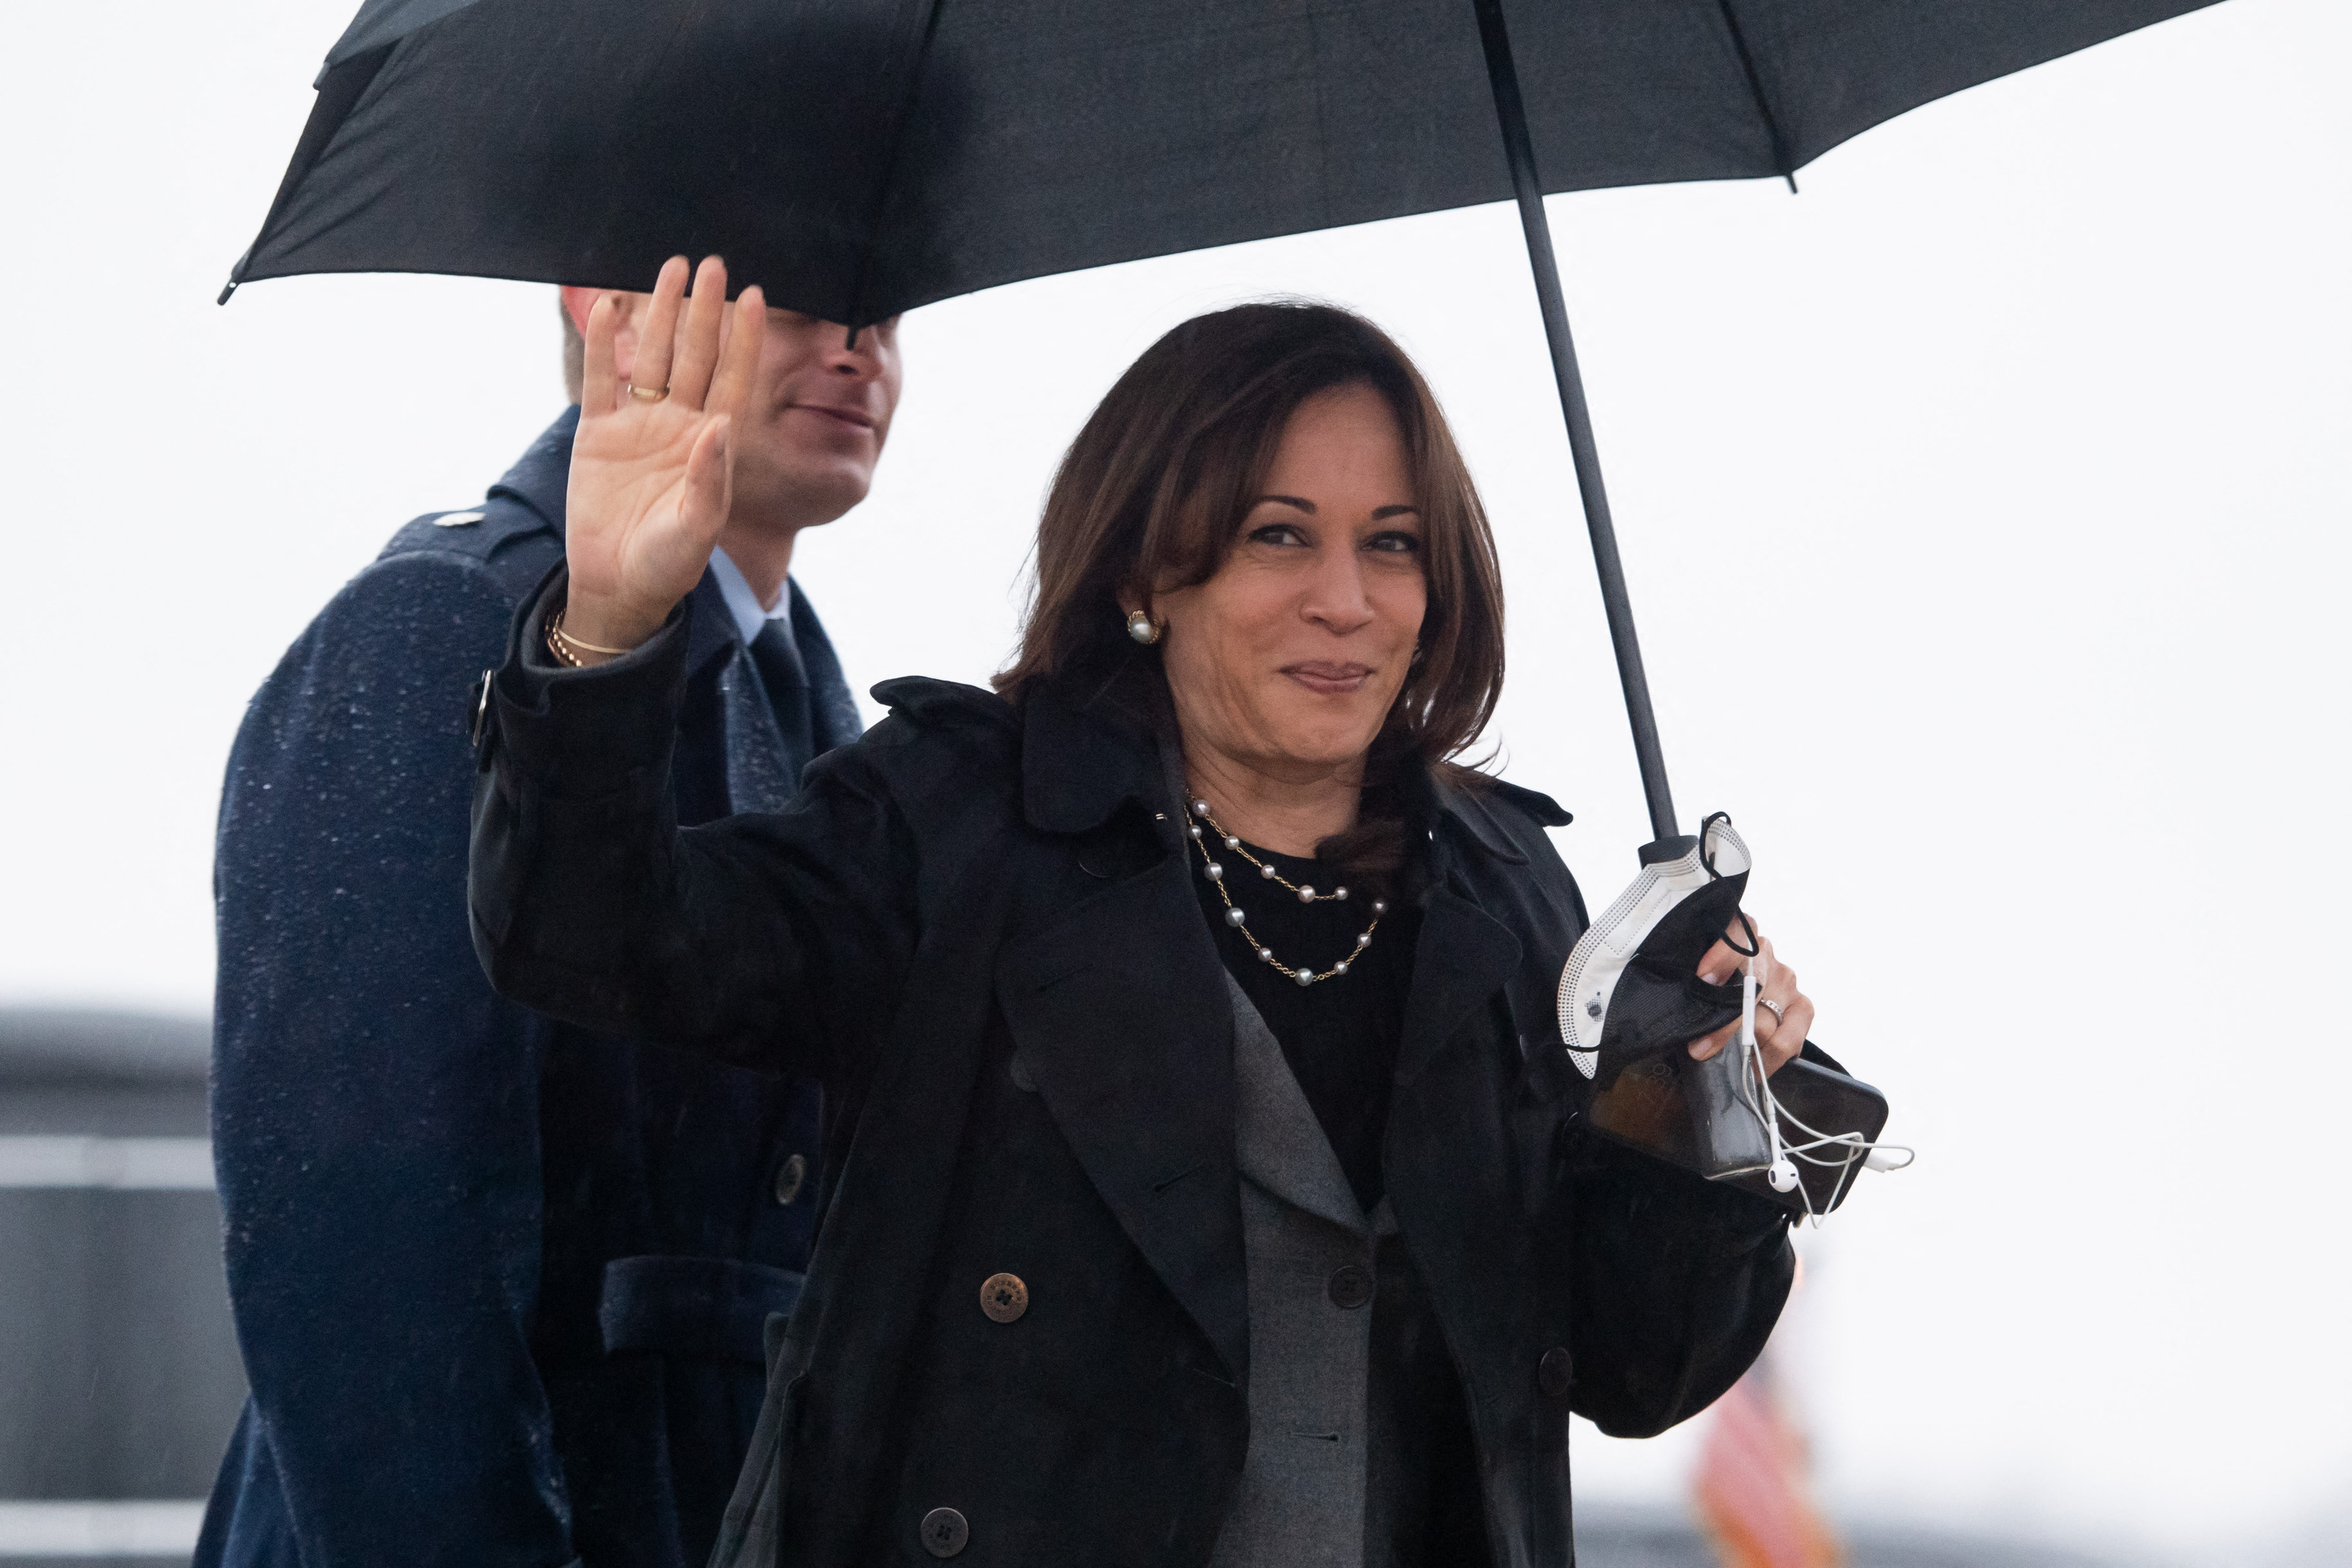 US Vice President Kamala Harris arrives to board Air Force Two at Joint Base Andrews in Maryland on March 9.